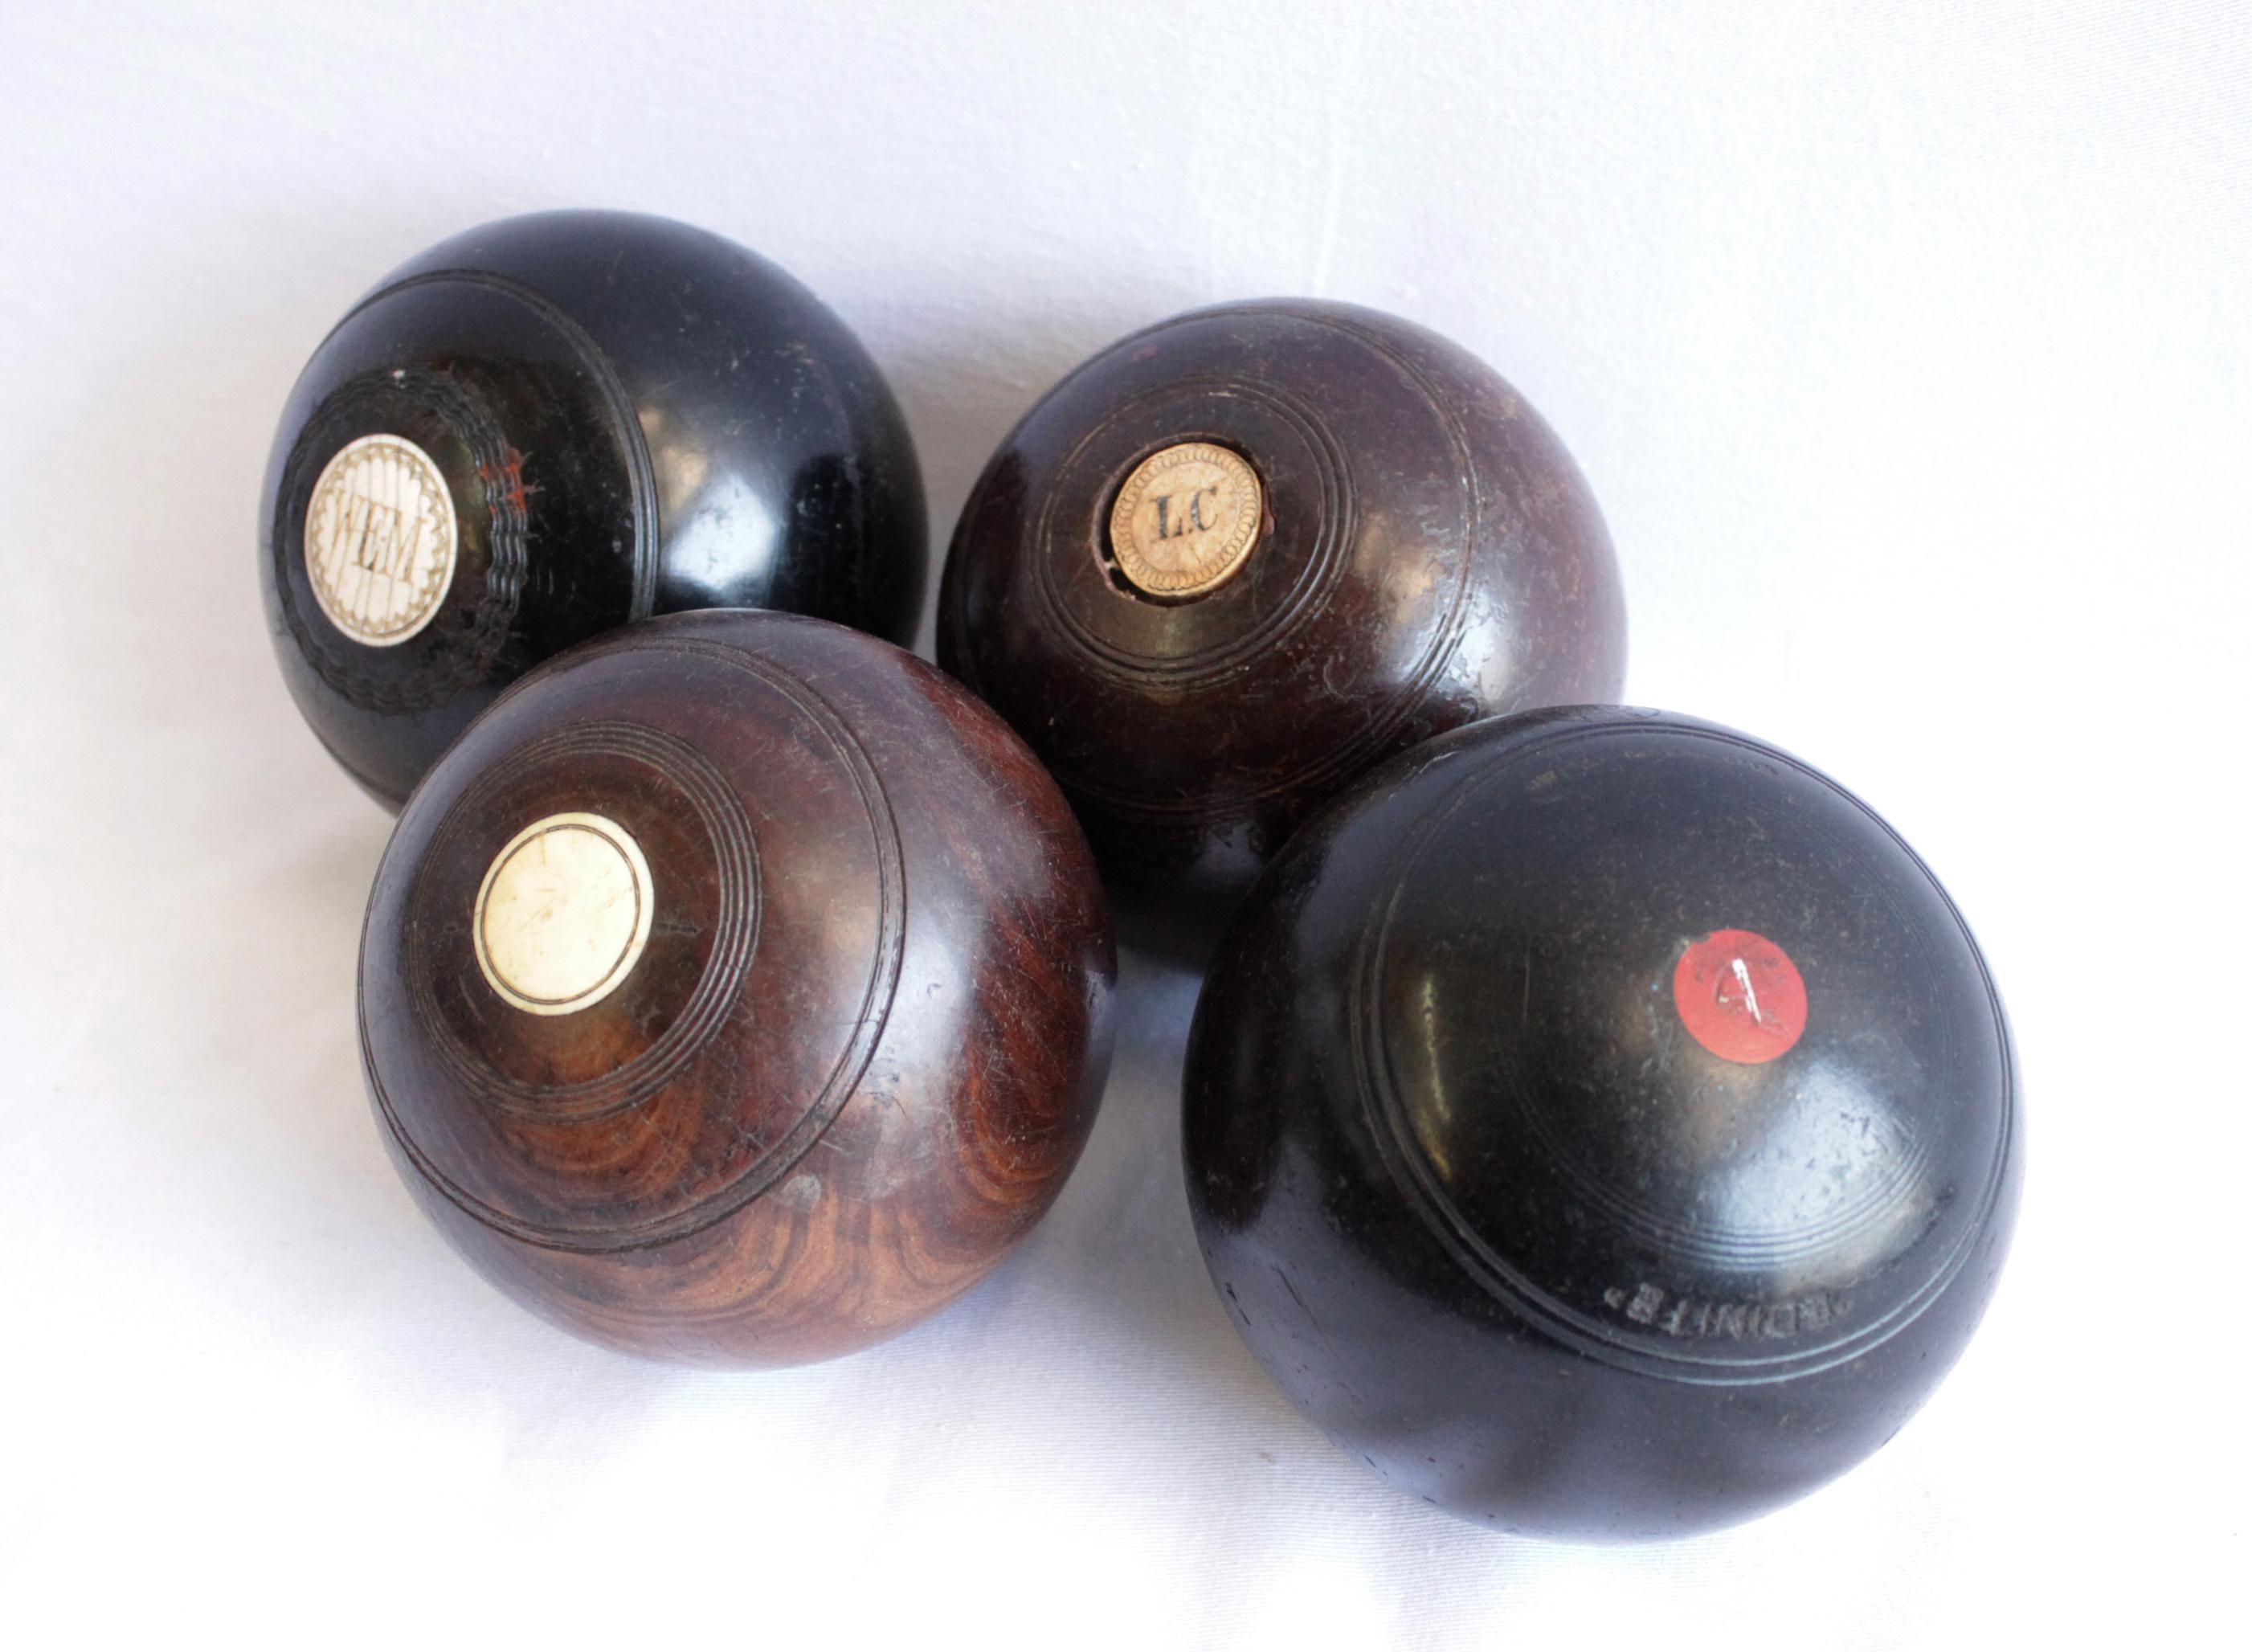 Antique wooden lawn bowling balls with monograms
These are not a set, but look great together on display.
Antique lawn bowling balls from London,
circa 1800-1900s
Approximate dimension: 5